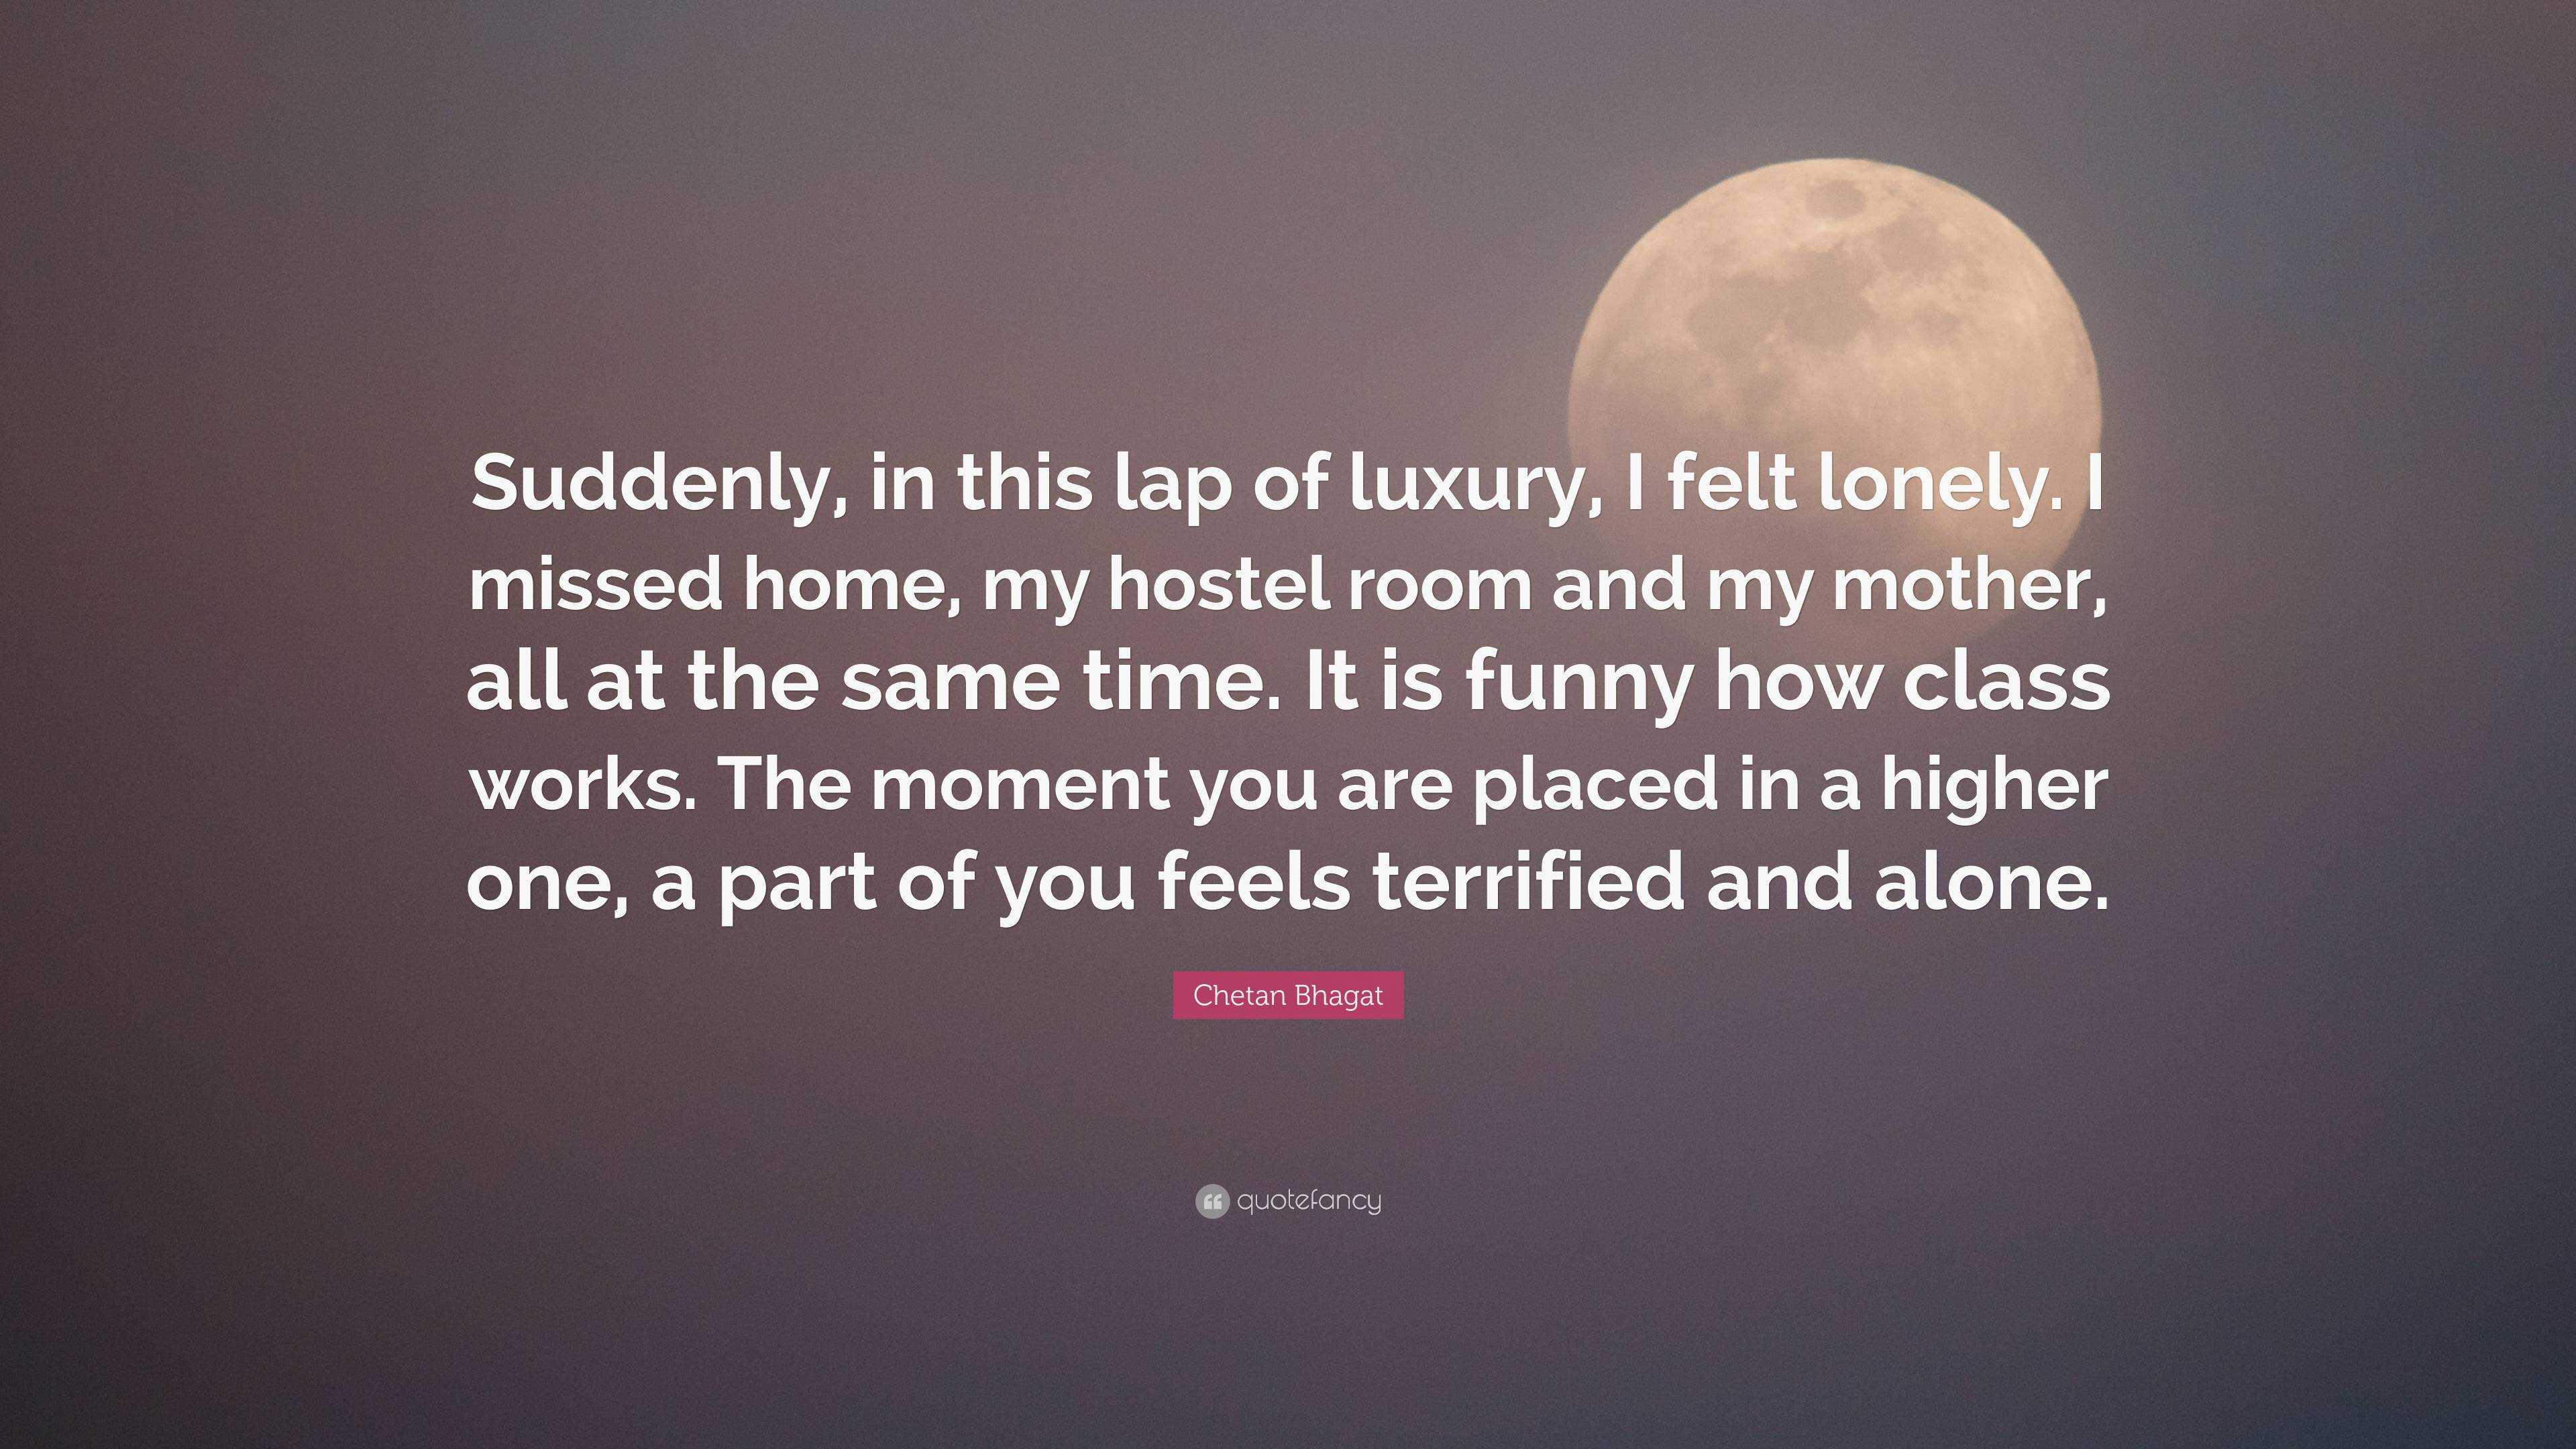 Chetan Bhagat Quote: “Suddenly, in this lap of luxury, I felt lonely. I  missed home, my hostel room and my mother, all at the same time. It is...”